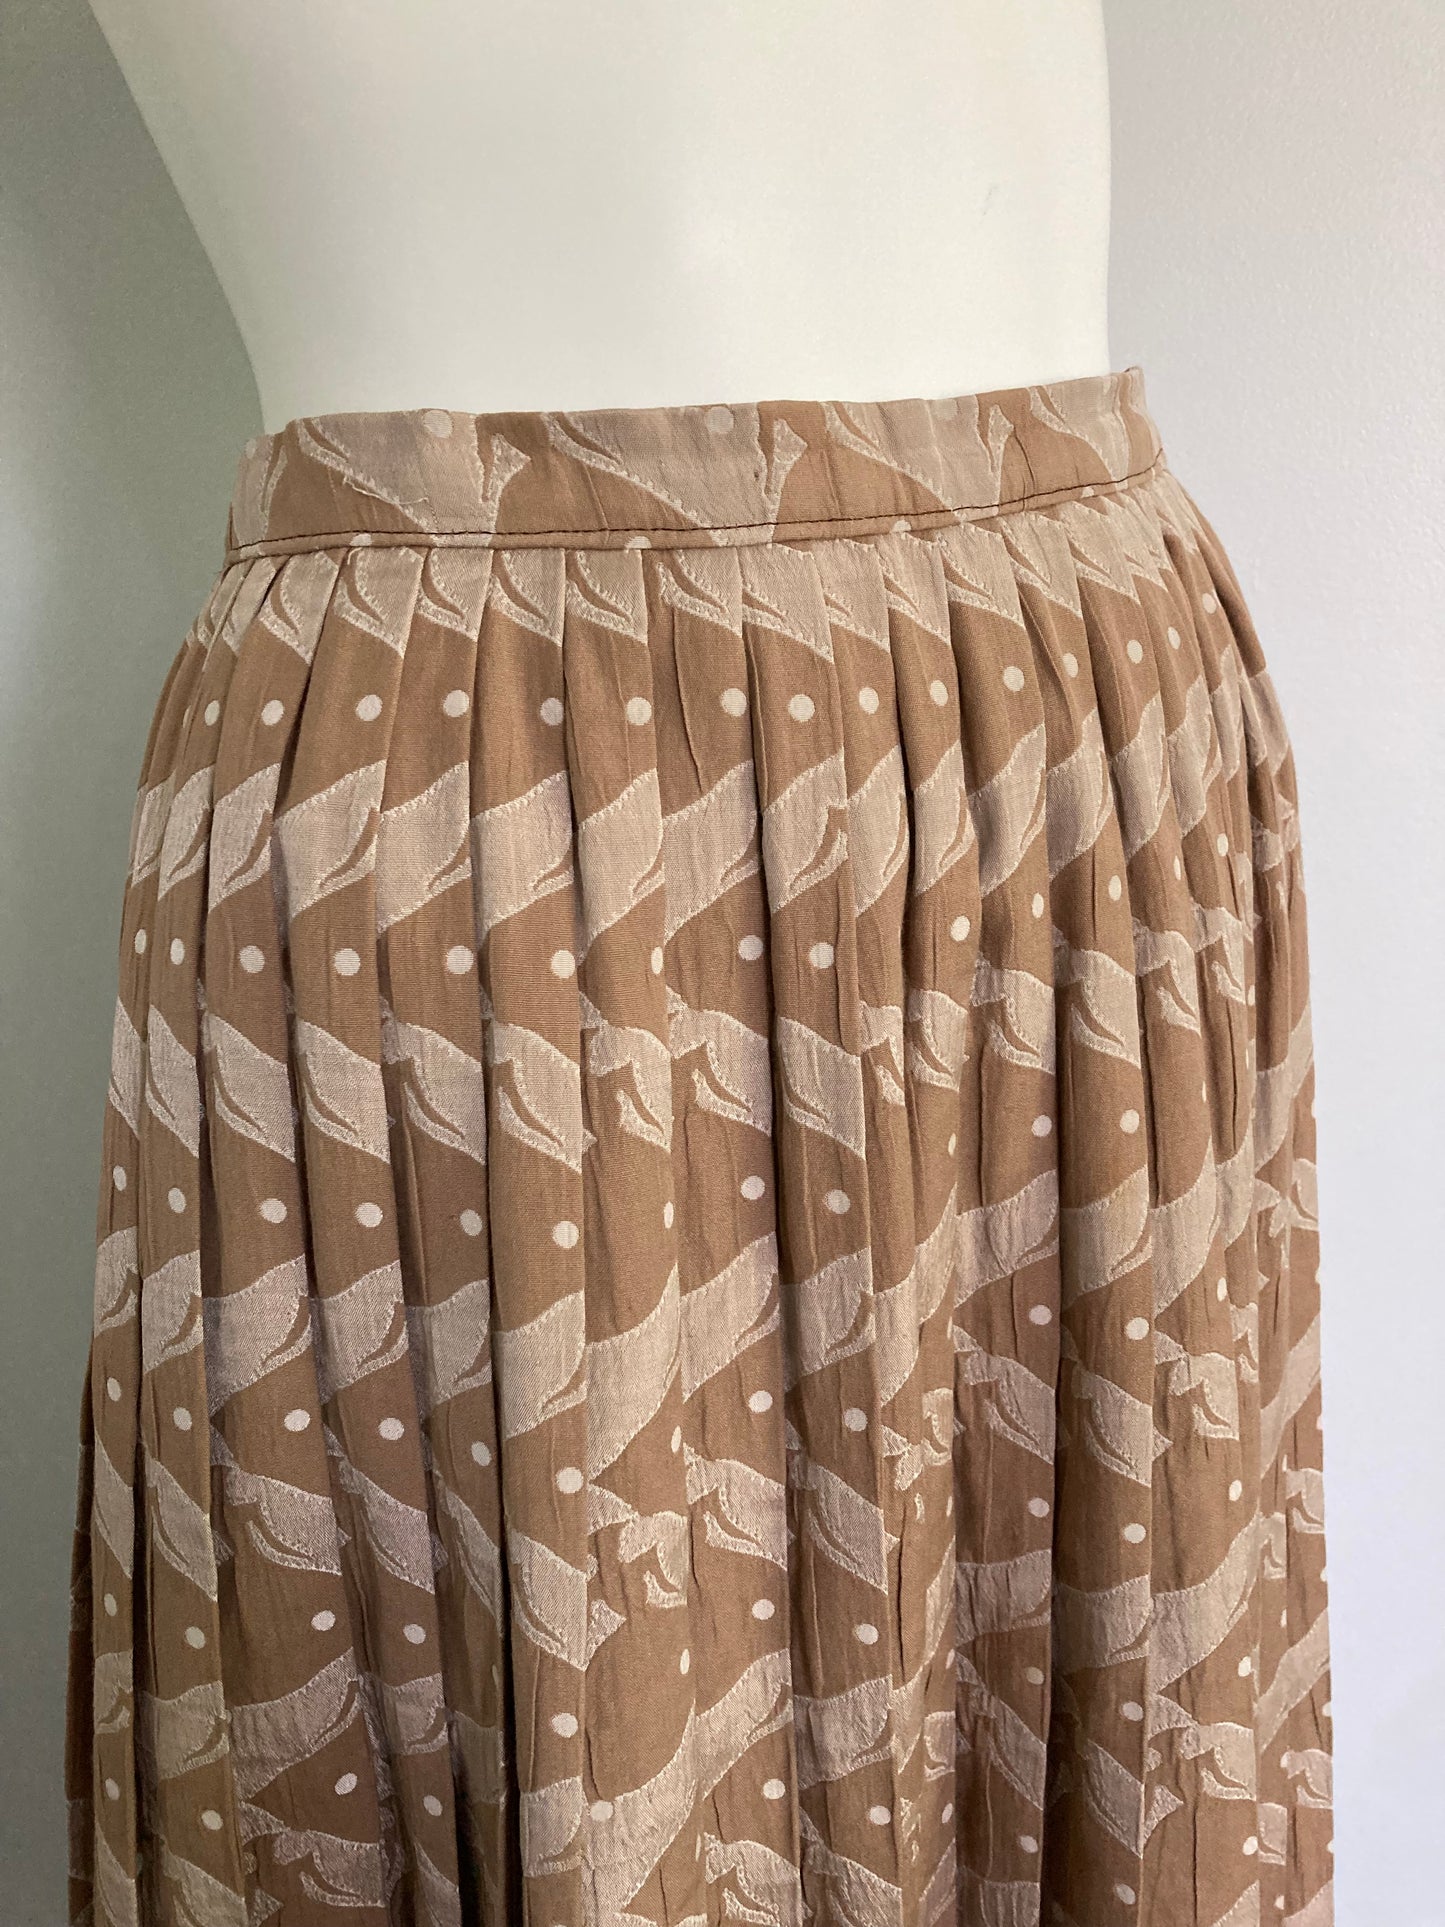 1970s Novelty Print Pleated A-line Skirt, Size S